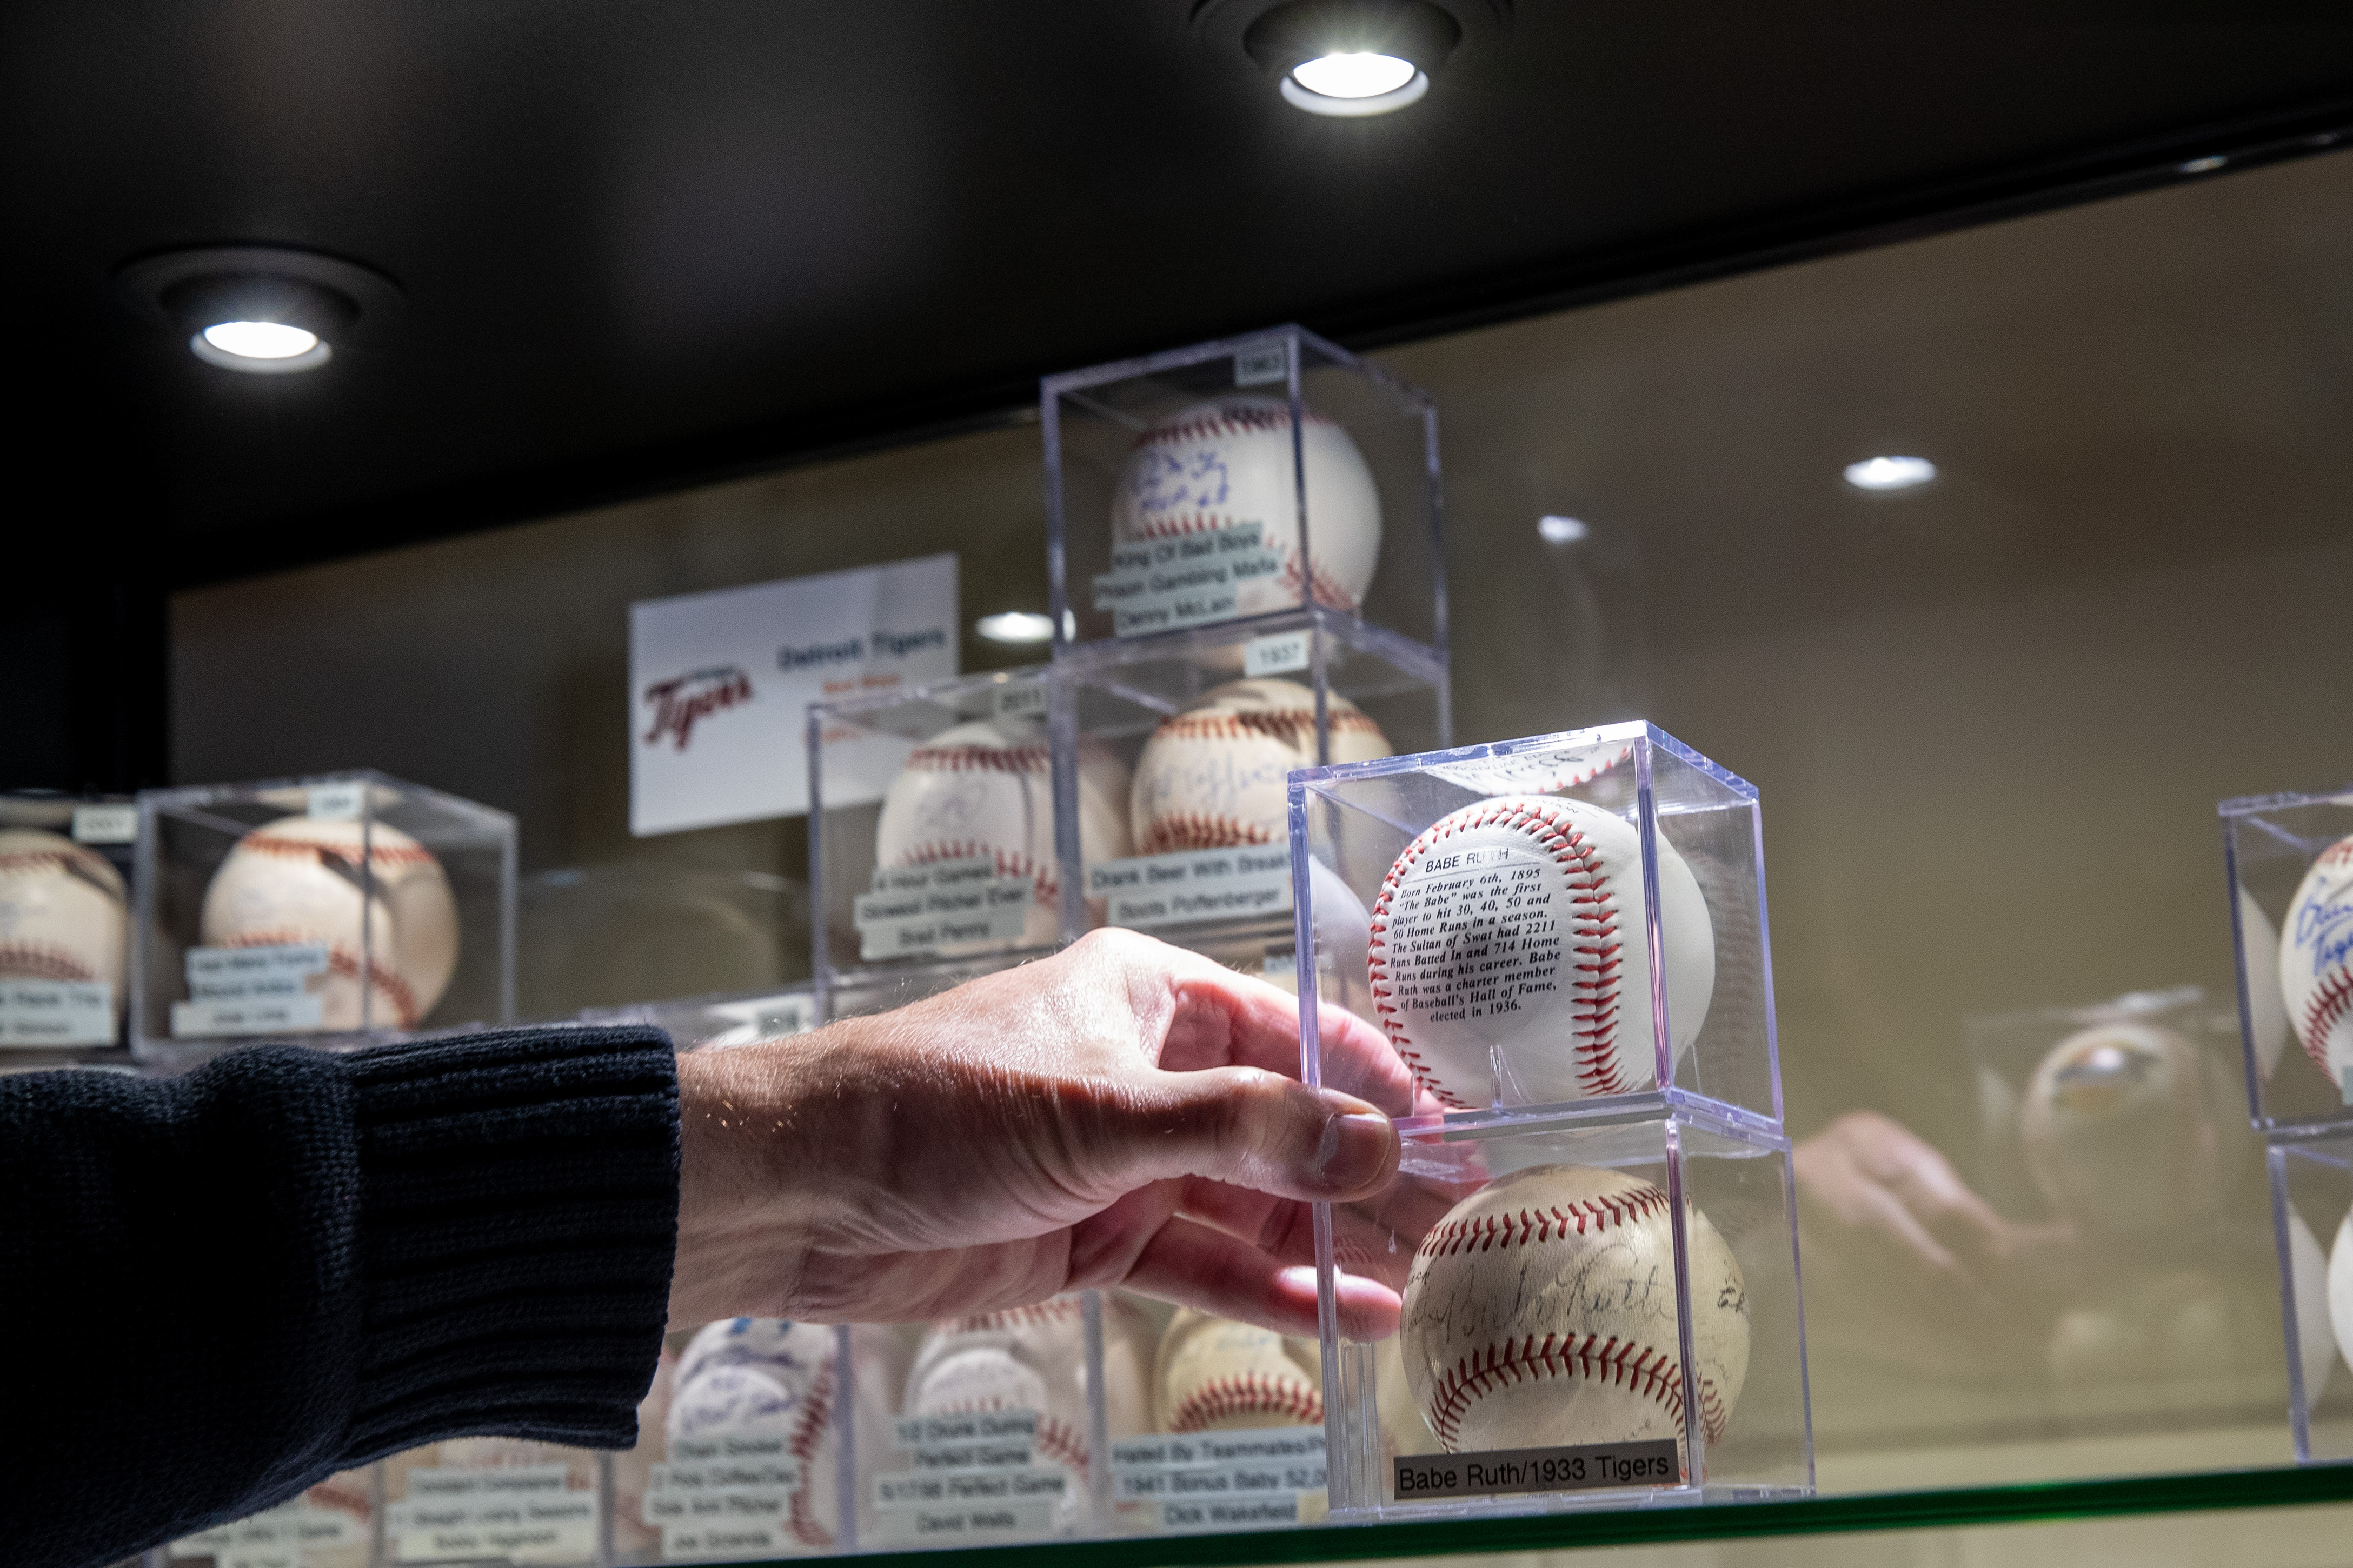 Detroit Tigers fan with more than 1,200 signed baseballs searching